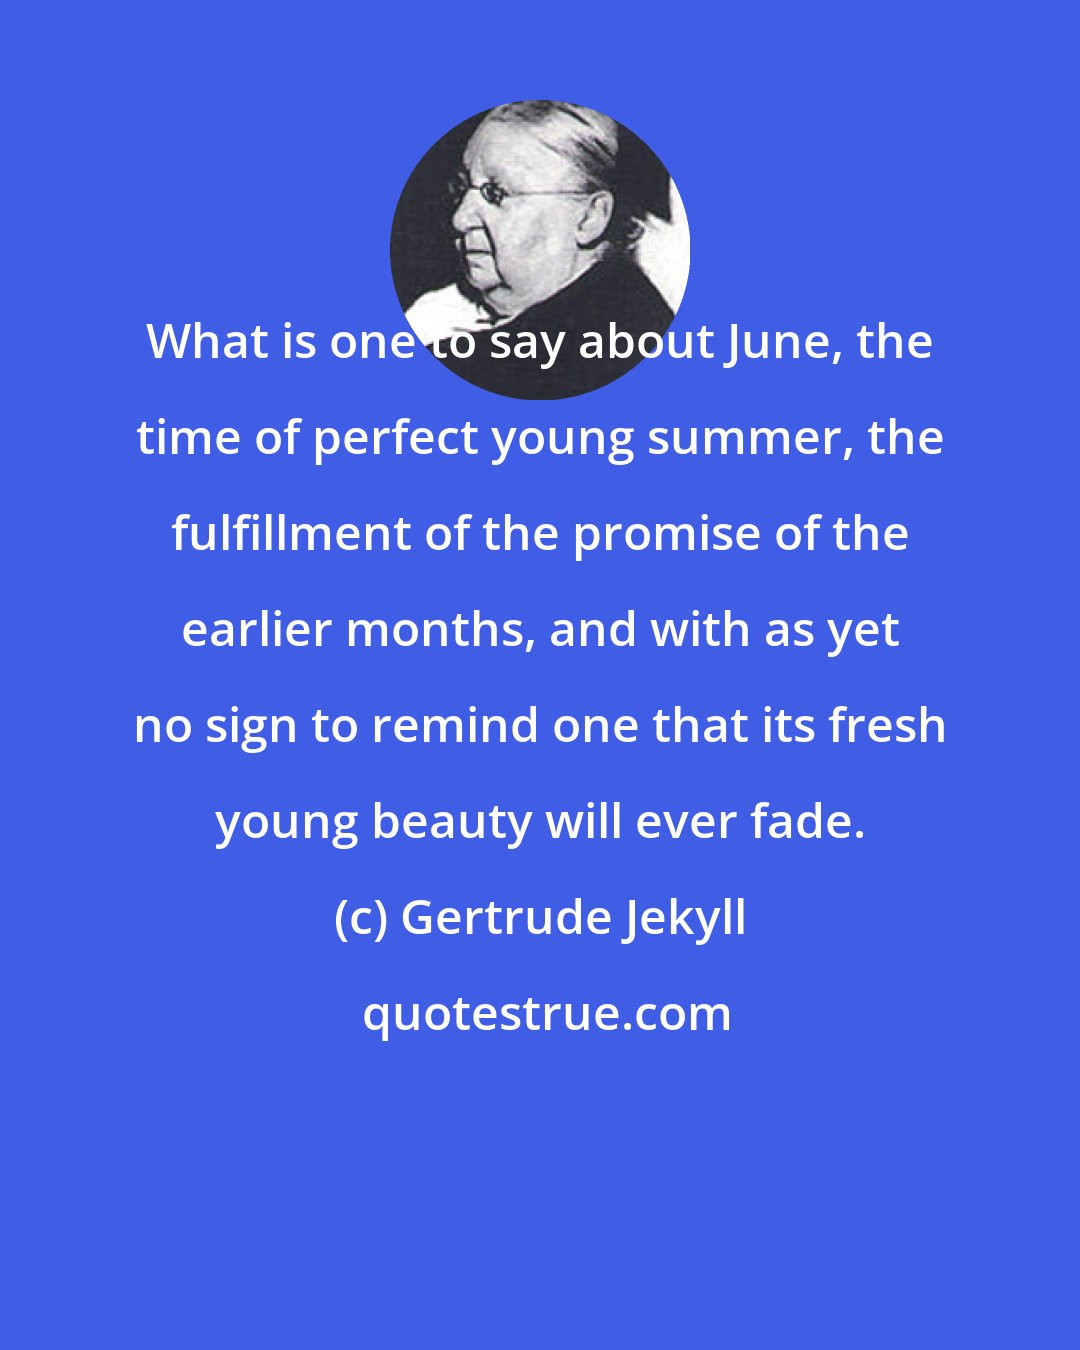 Gertrude Jekyll: What is one to say about June, the time of perfect young summer, the fulfillment of the promise of the earlier months, and with as yet no sign to remind one that its fresh young beauty will ever fade.